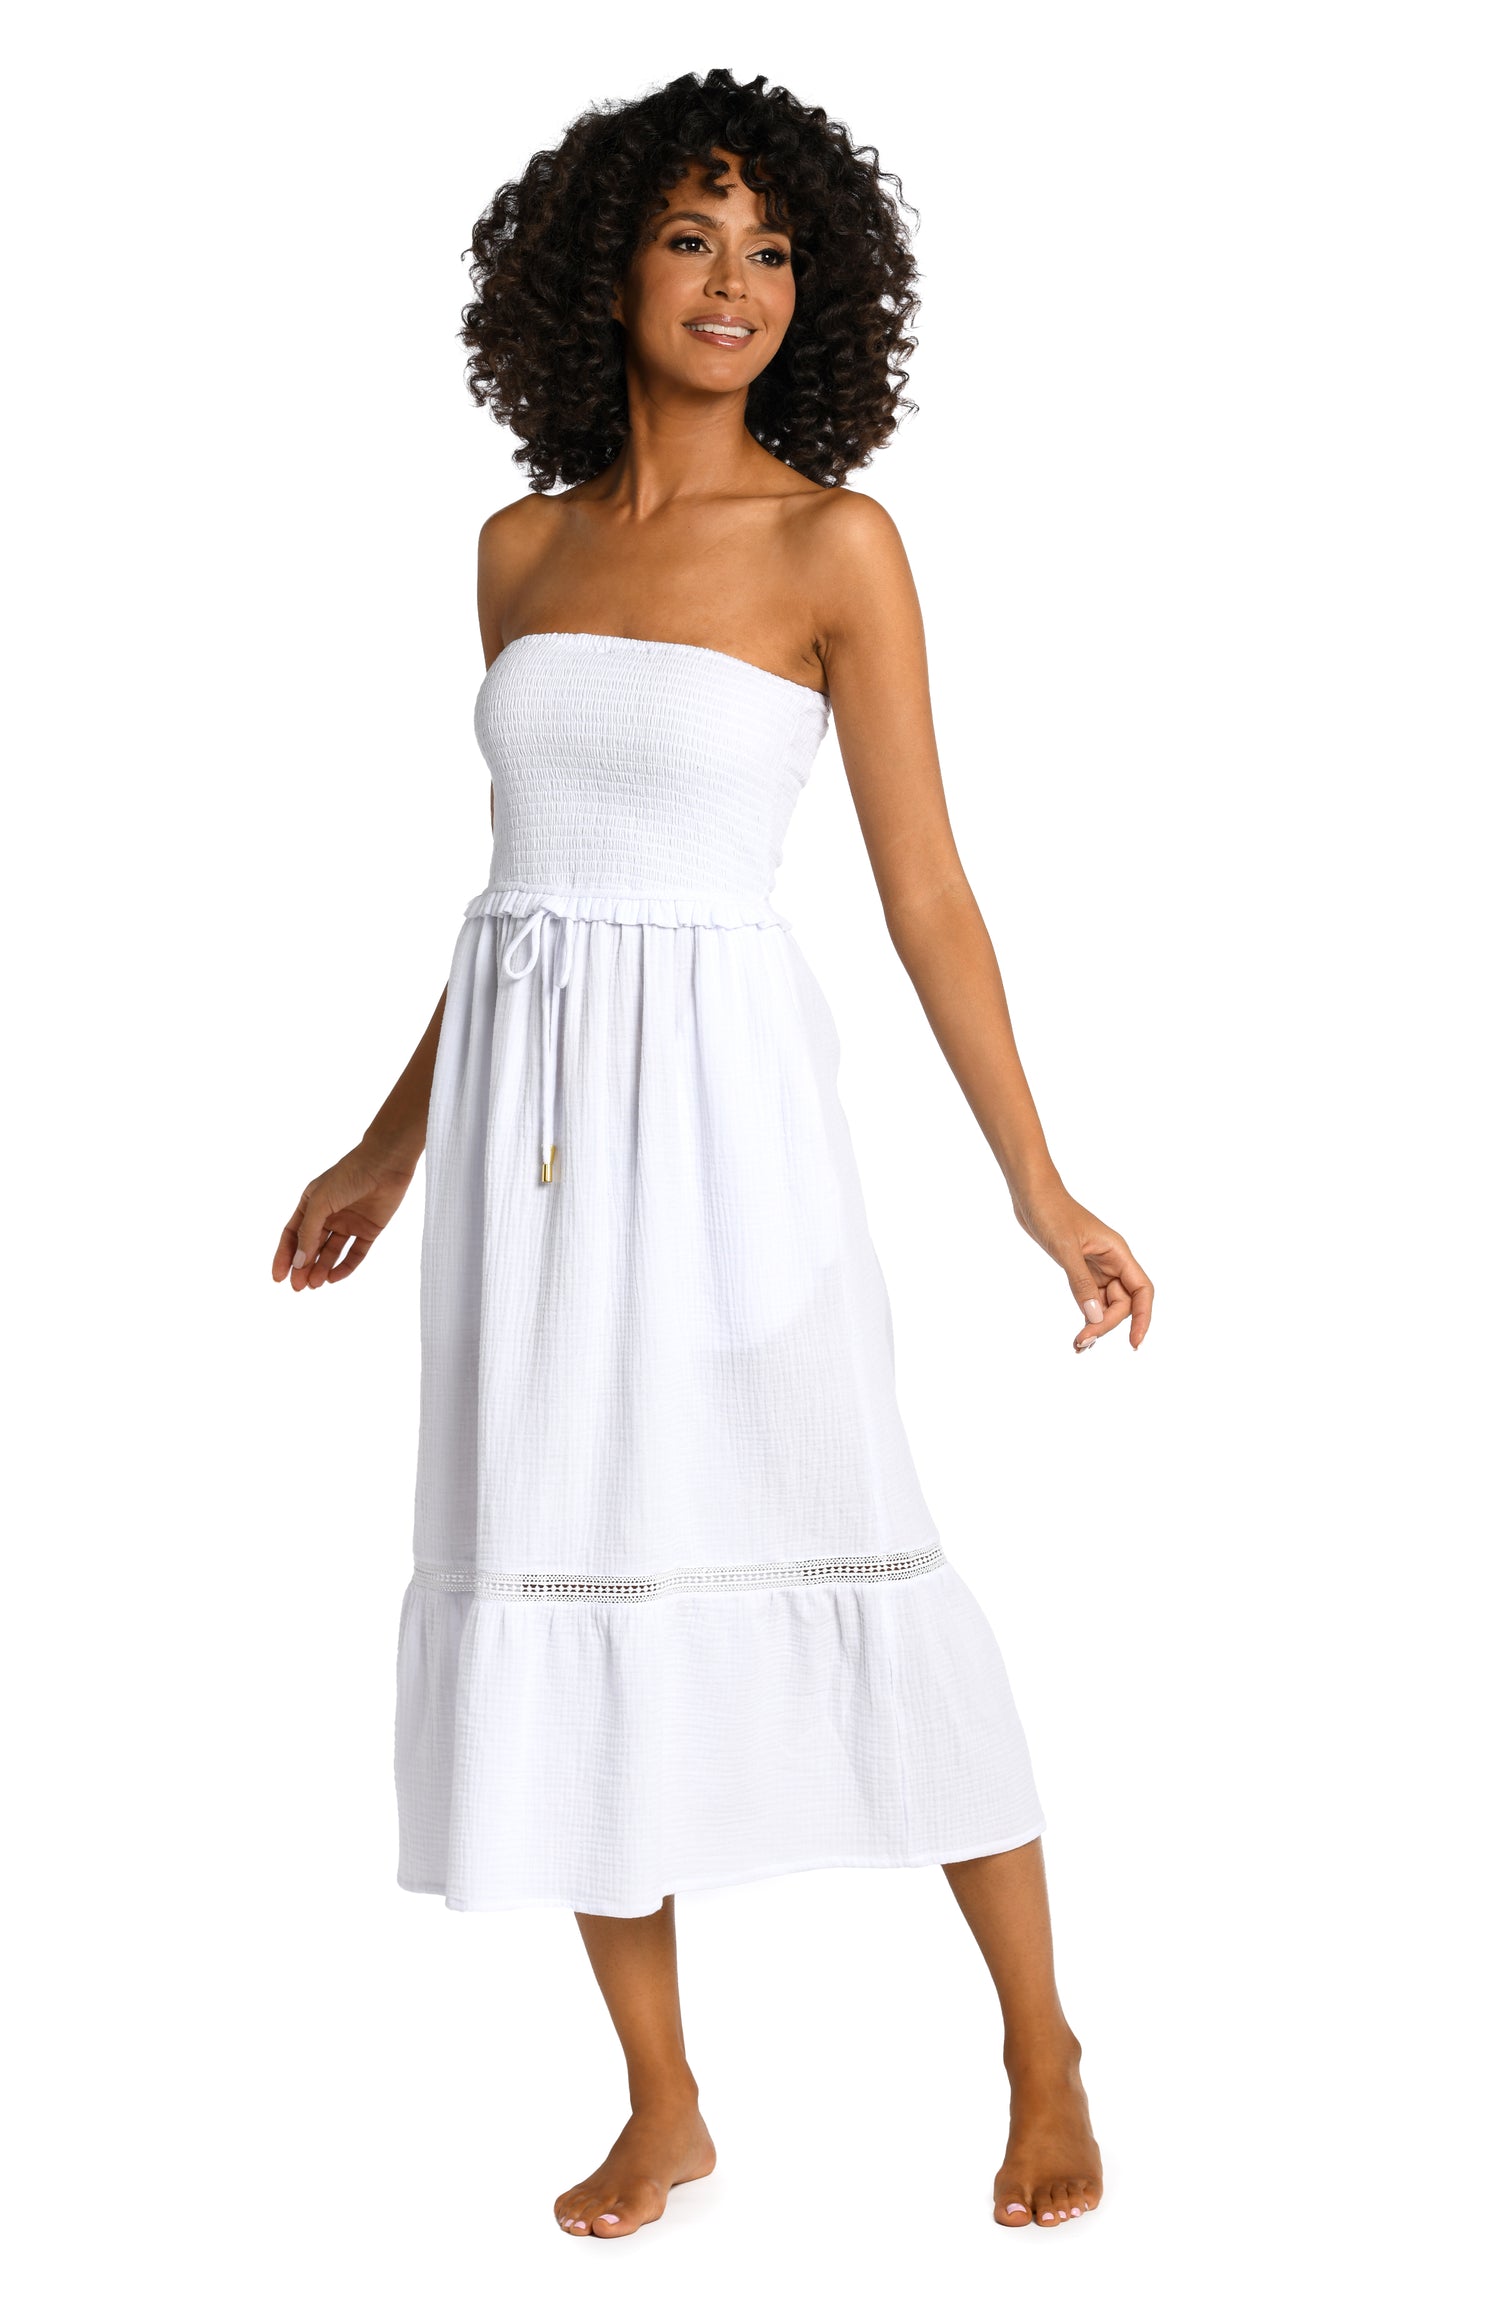 Model is wearing a white midi dress cover up from our Seaside Covers collection!